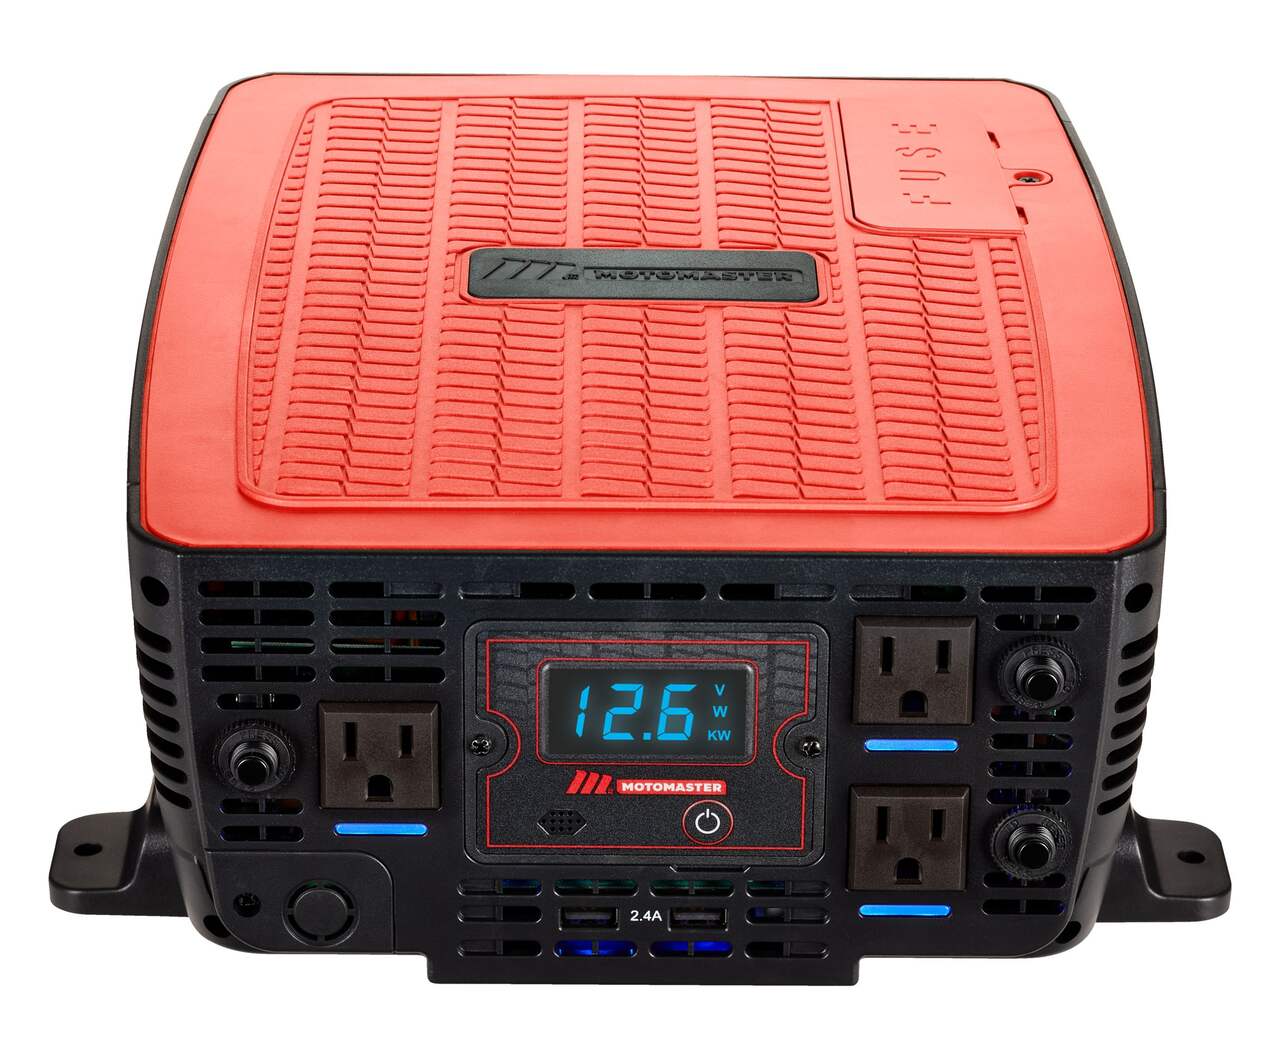 https://media-www.canadiantire.ca/product/automotive/light-auto-parts/auto-battery-accessories/0112107/motomaster-3000w-modified-sine-wave-power-inverter-09f49d7f-b6ea-481f-abe8-cad4f0dc9ef2-jpgrendition.jpg?imdensity=1&imwidth=640&impolicy=mZoom